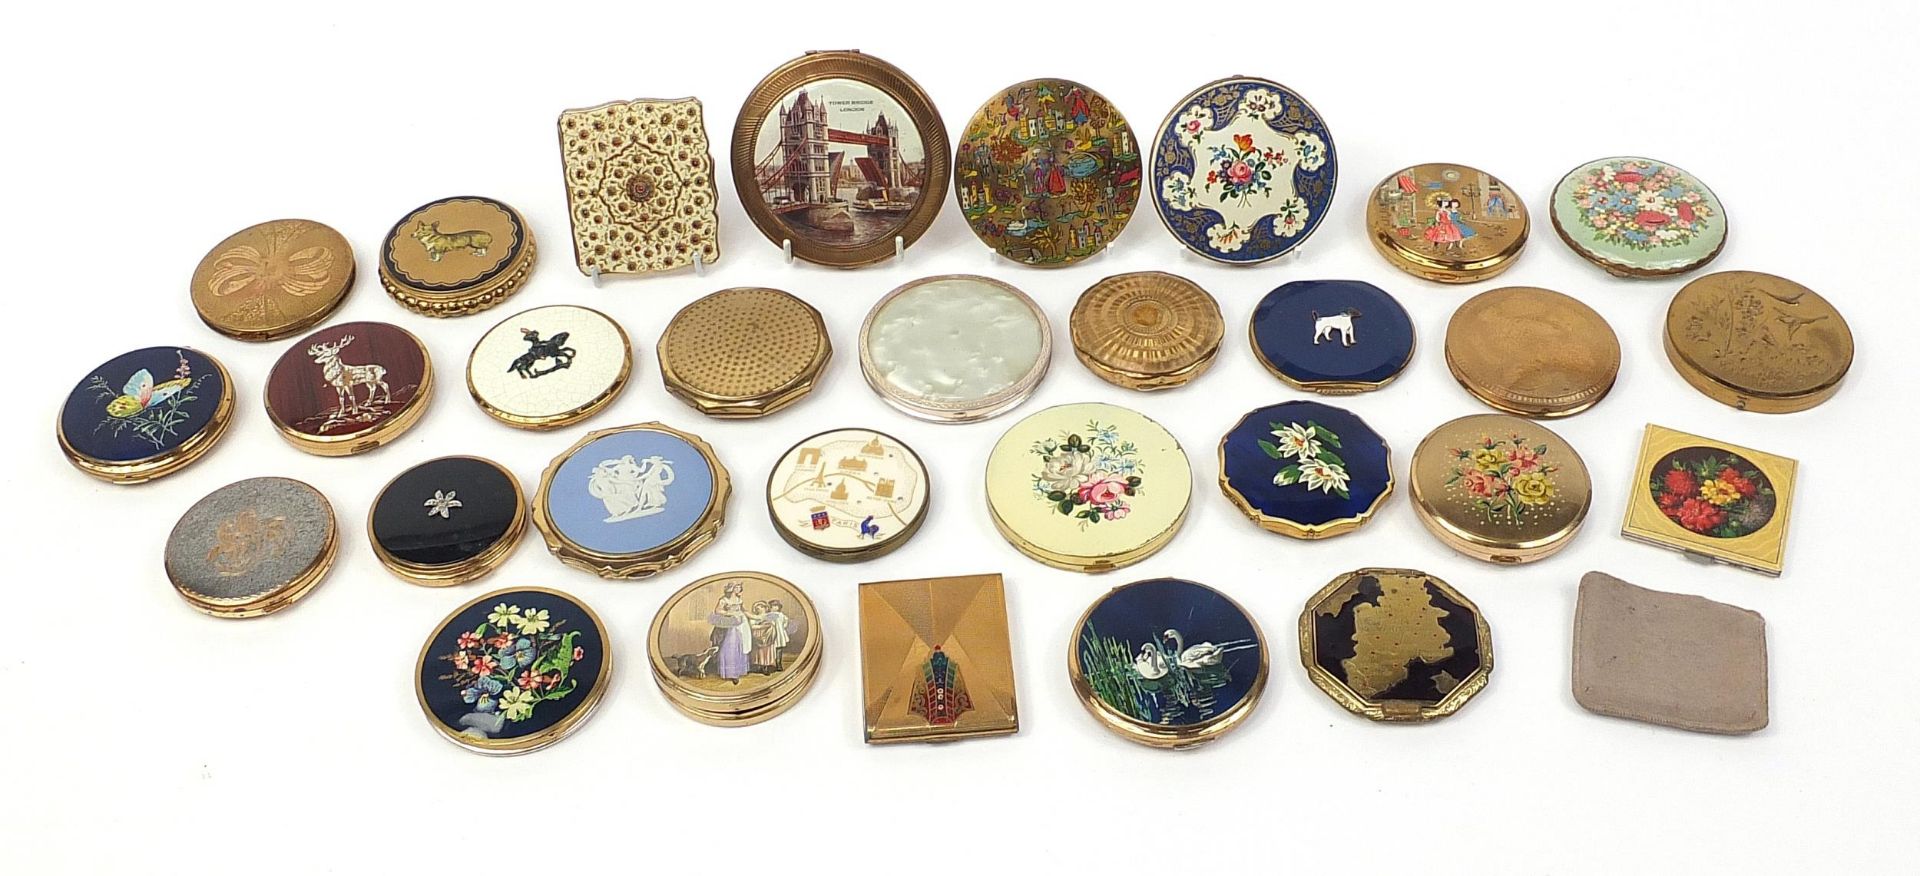 Thirty vintage ladies compacts including Stratton